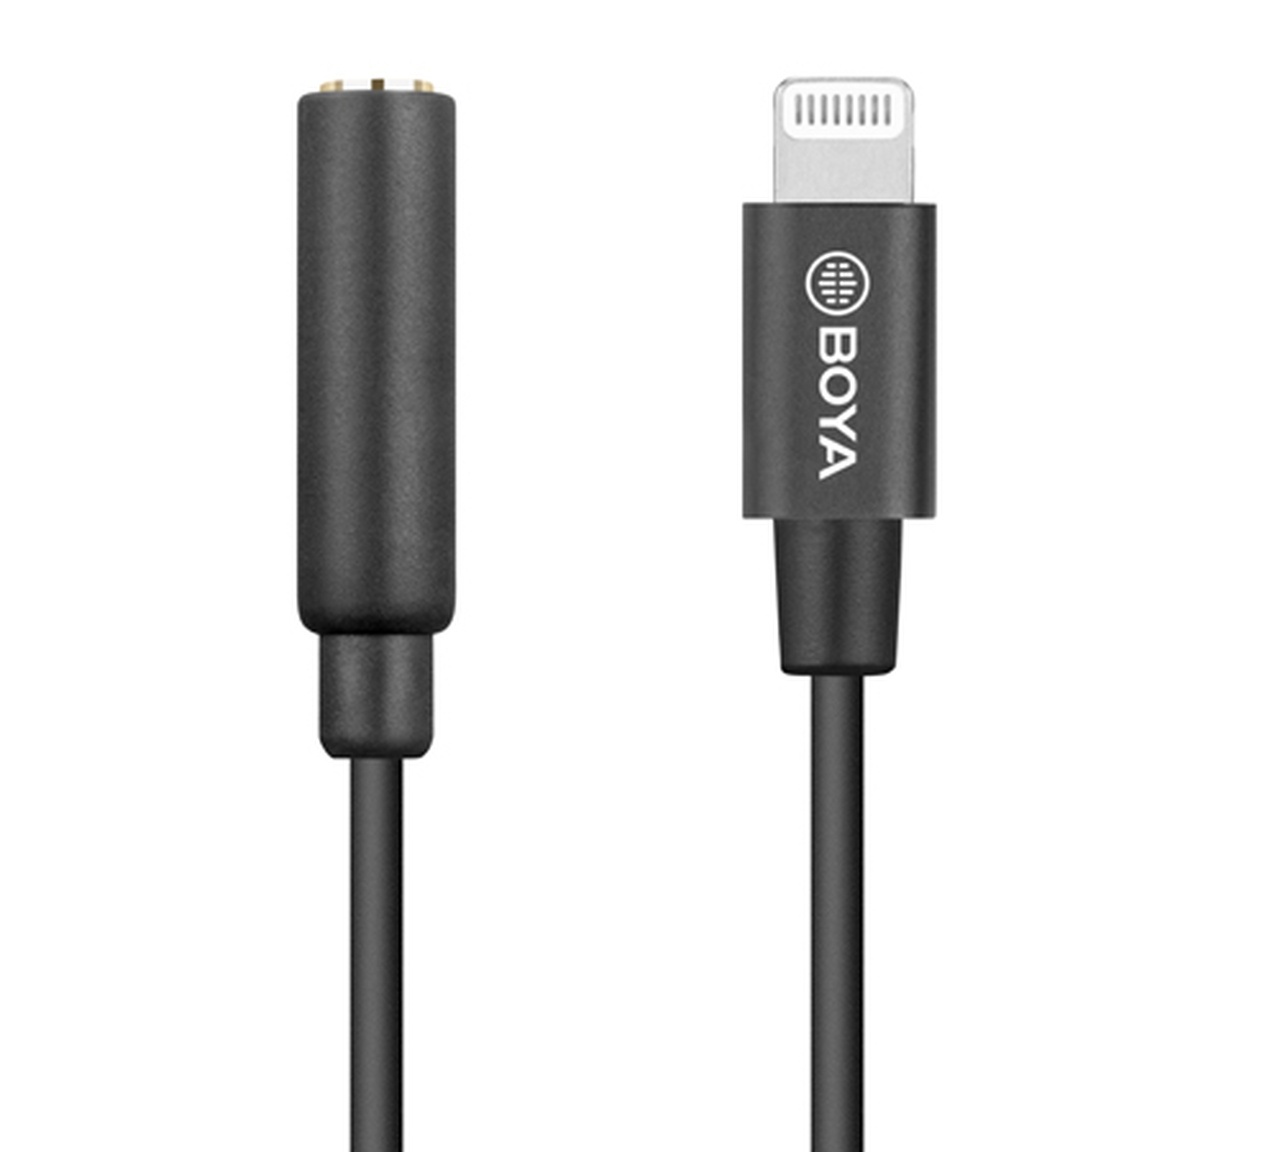 Boya BY-K3 3.5mm Female TRRS to Male Lightning Adapter Cable (6cm)